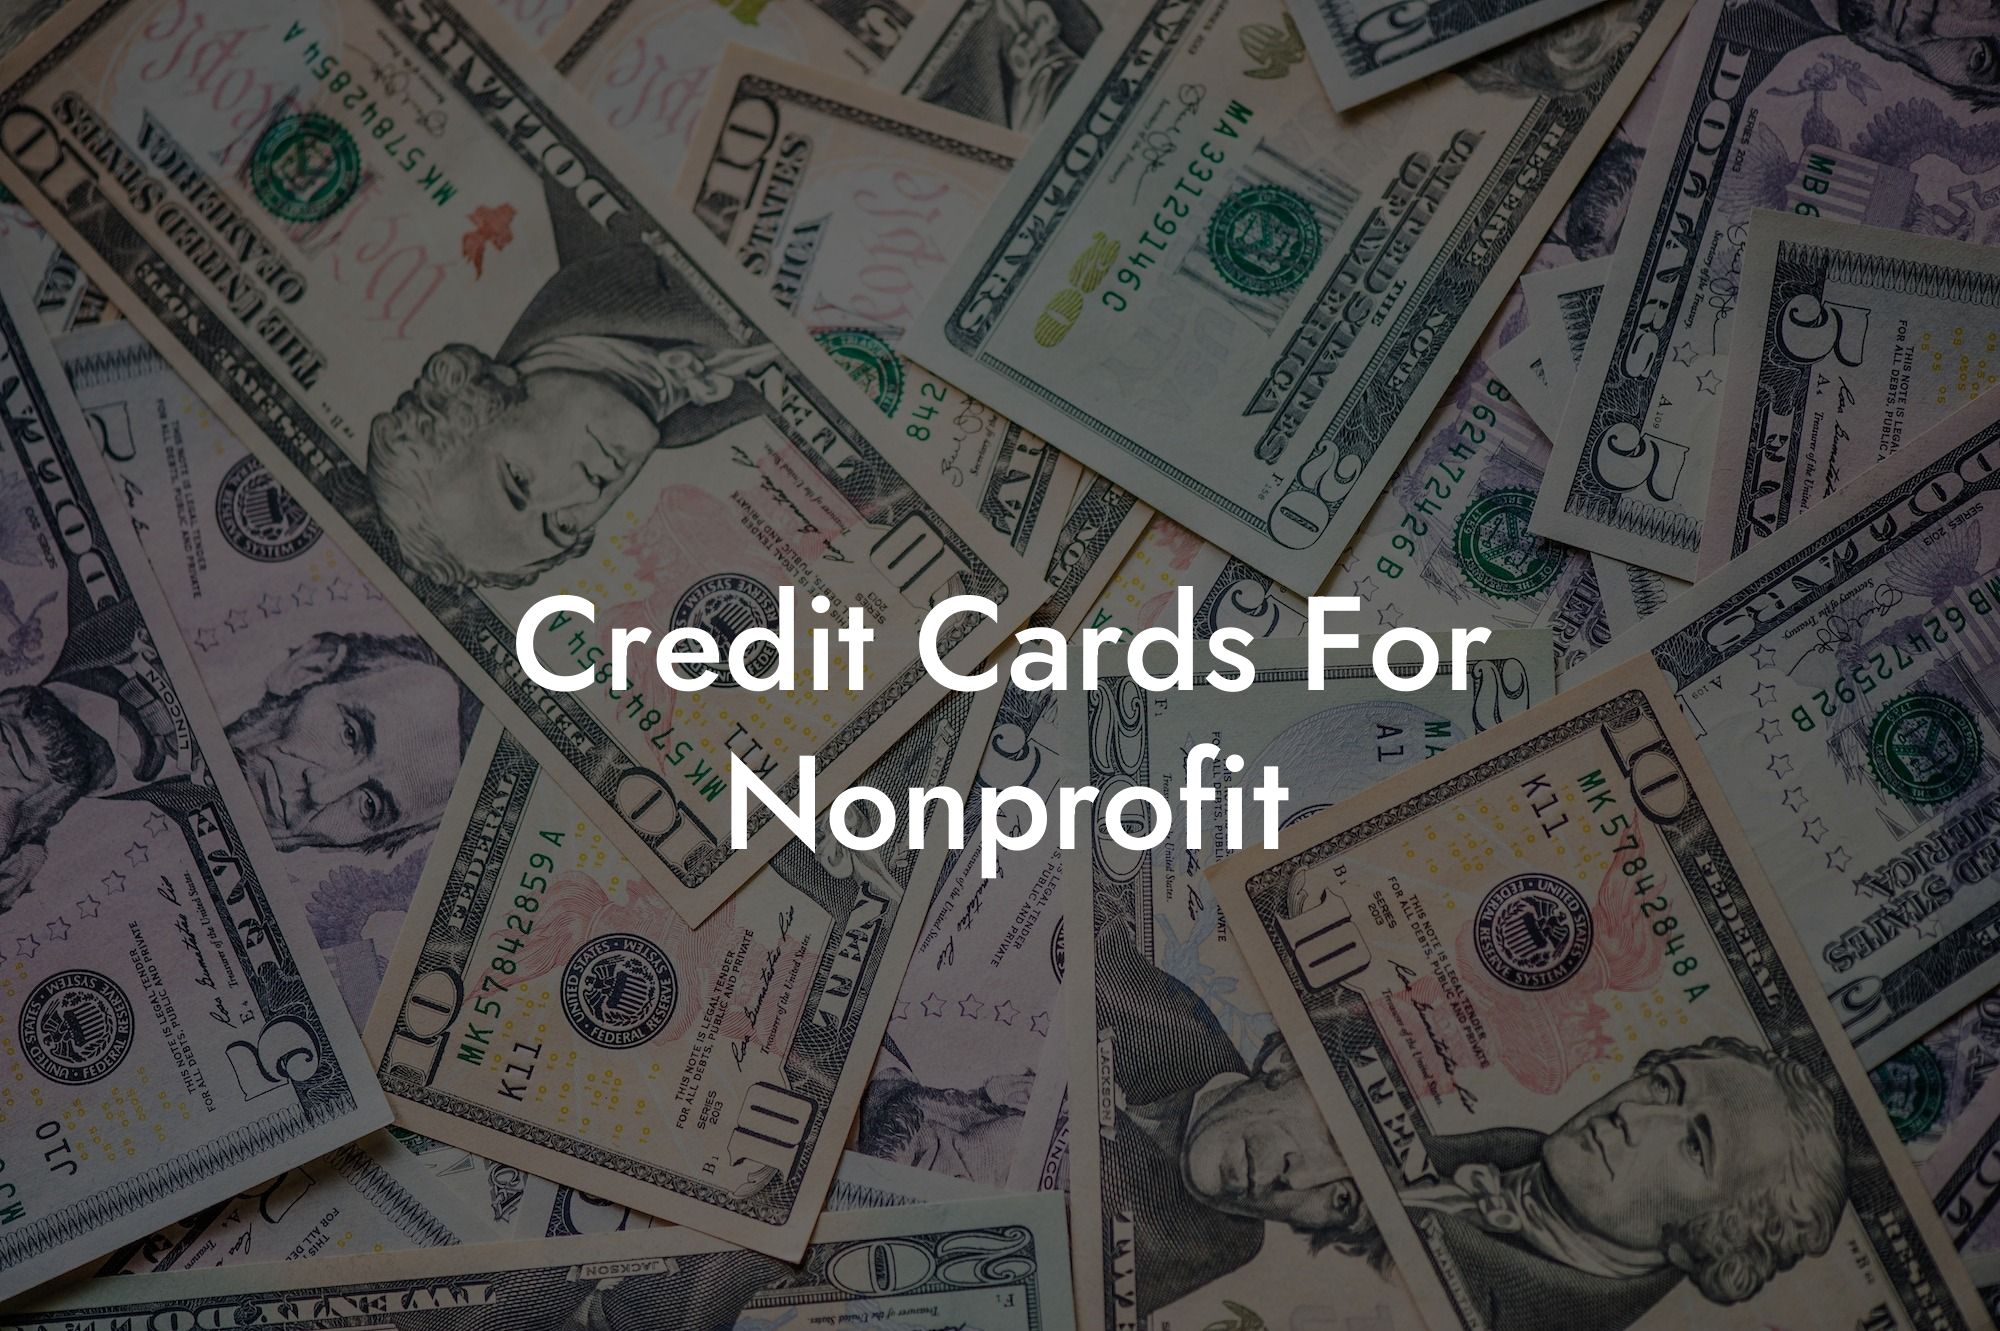 Credit Cards For Nonprofit